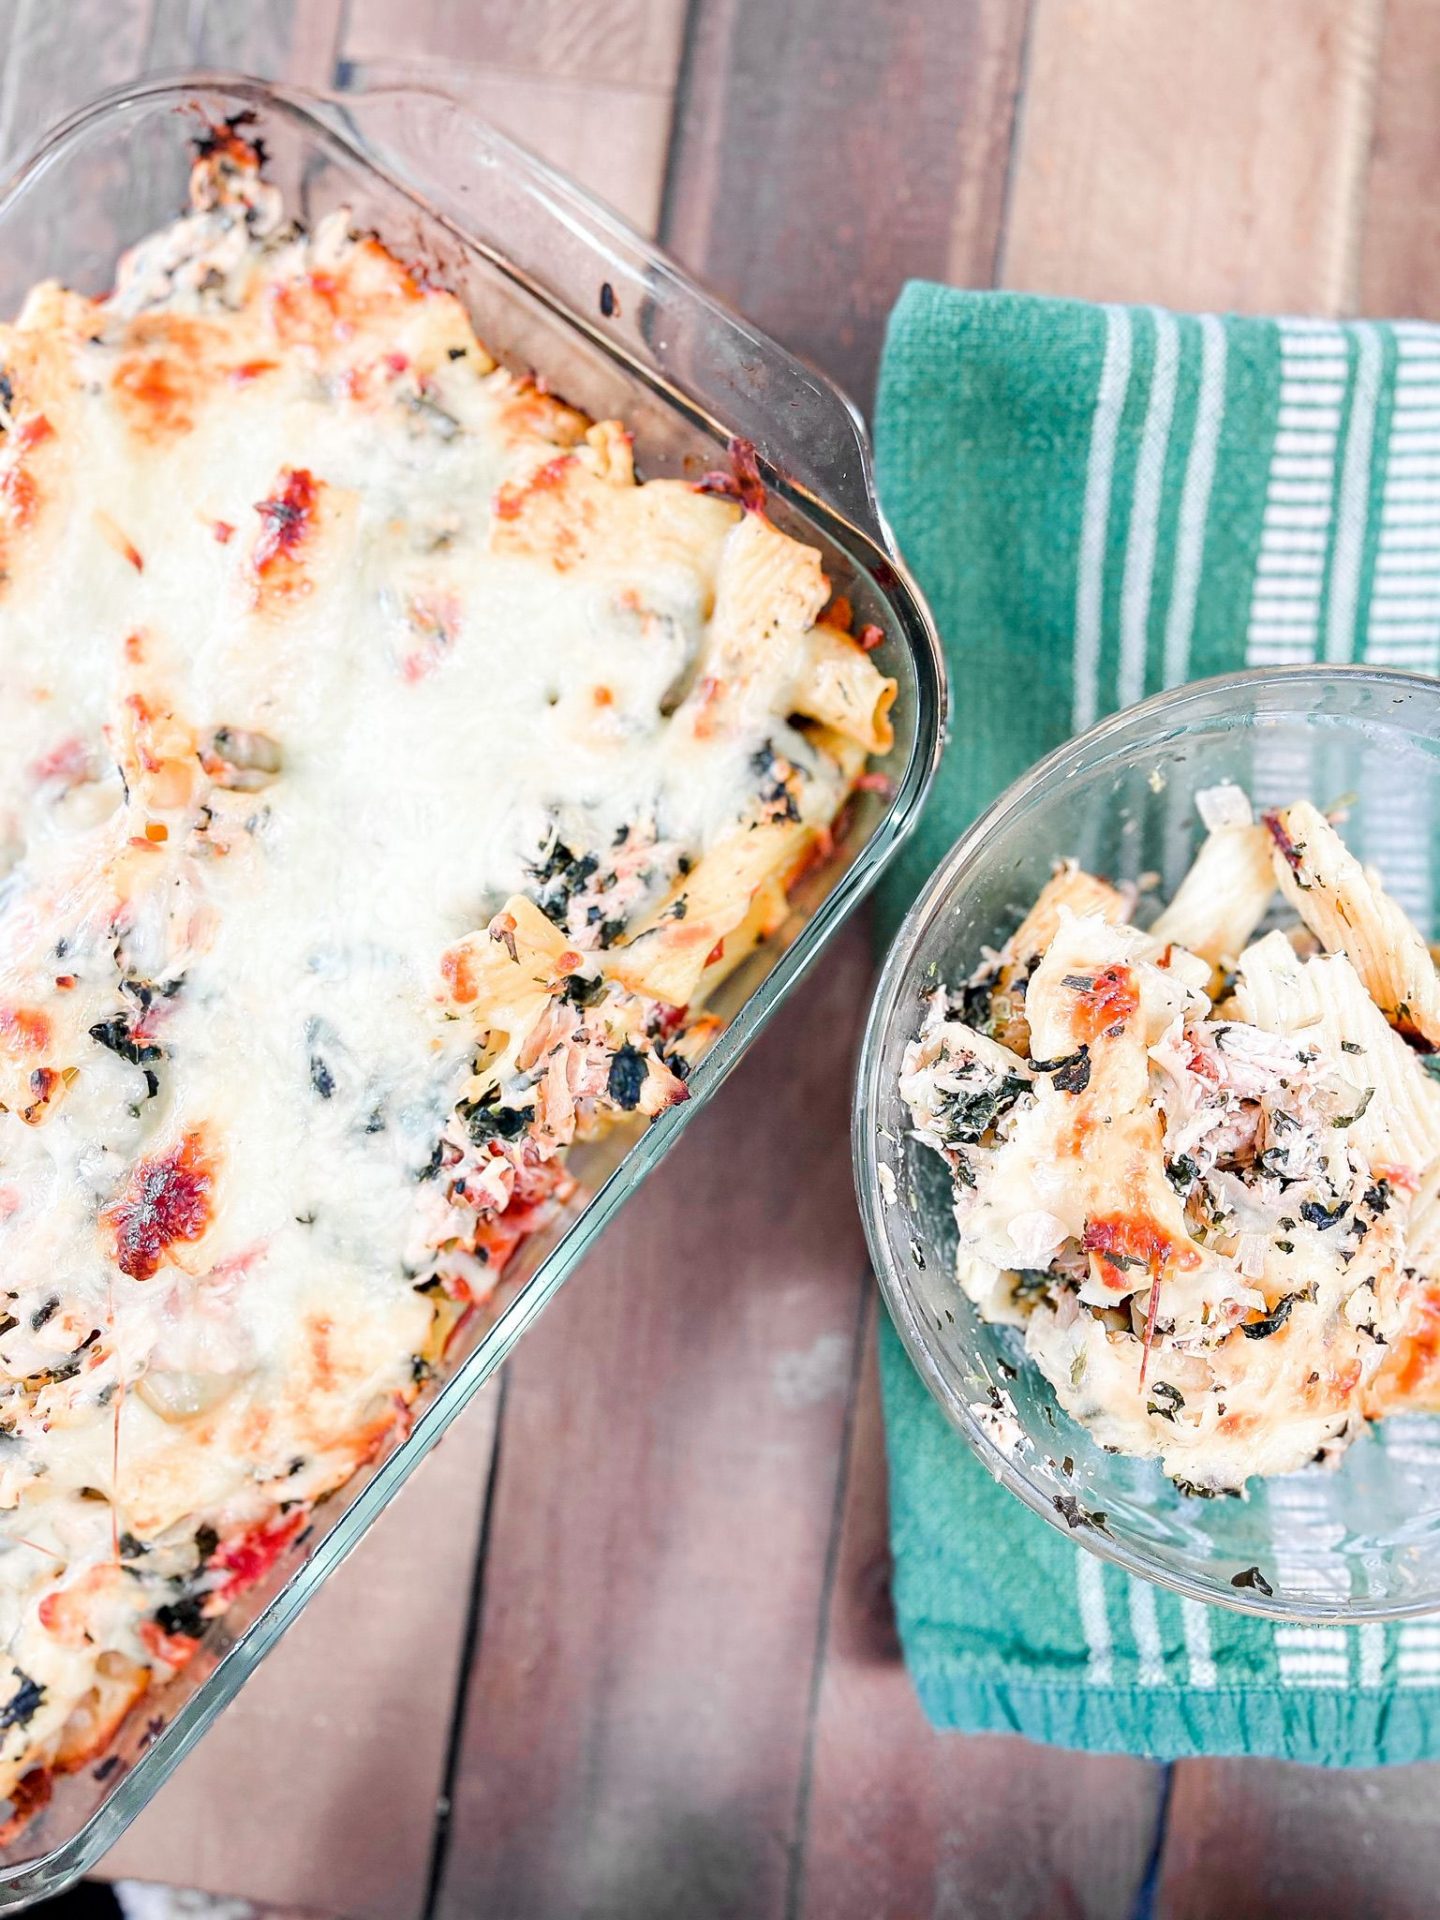 Delicious Spinach & Chicken Pasta Bake by Alabama Food + Healthy Living blogger, Heather Brown // My Life Well Loved